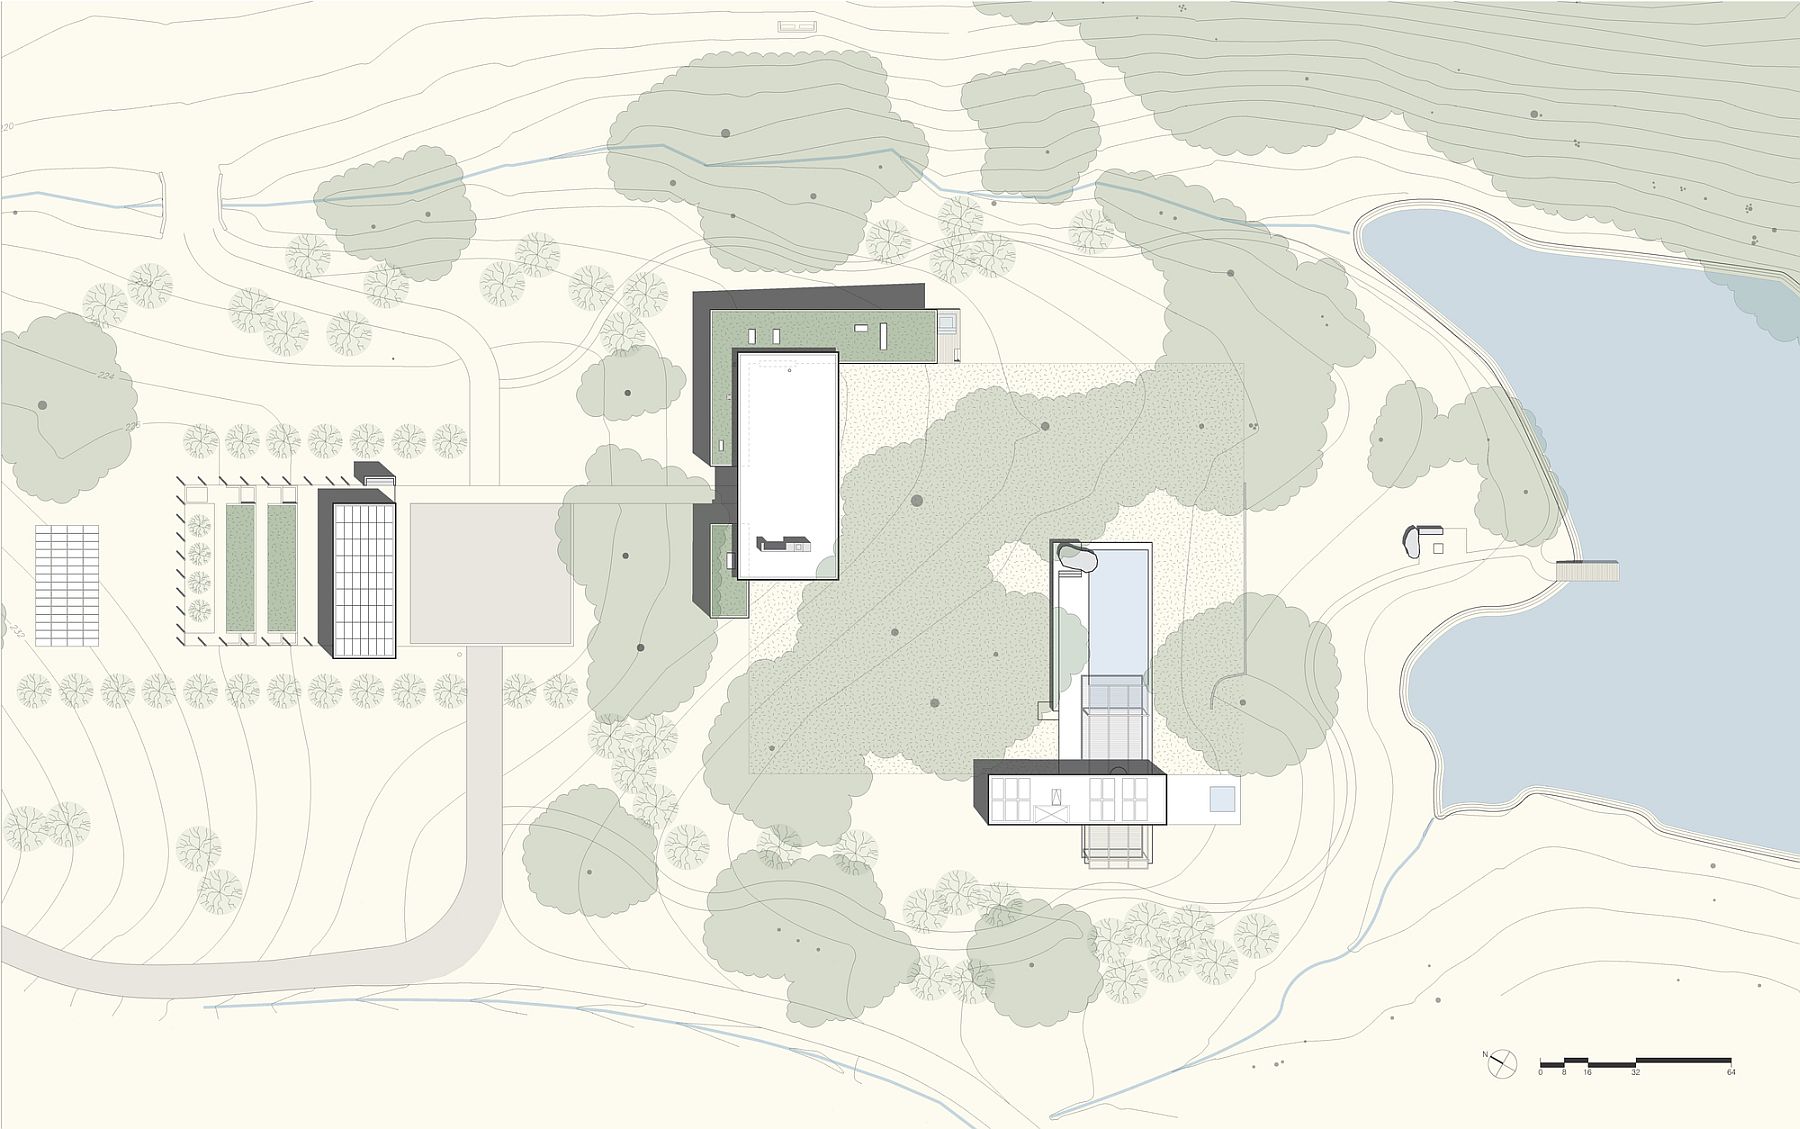 SIte plan of the Sonoma Residence by Turnbull Griffin Haesloop Architects